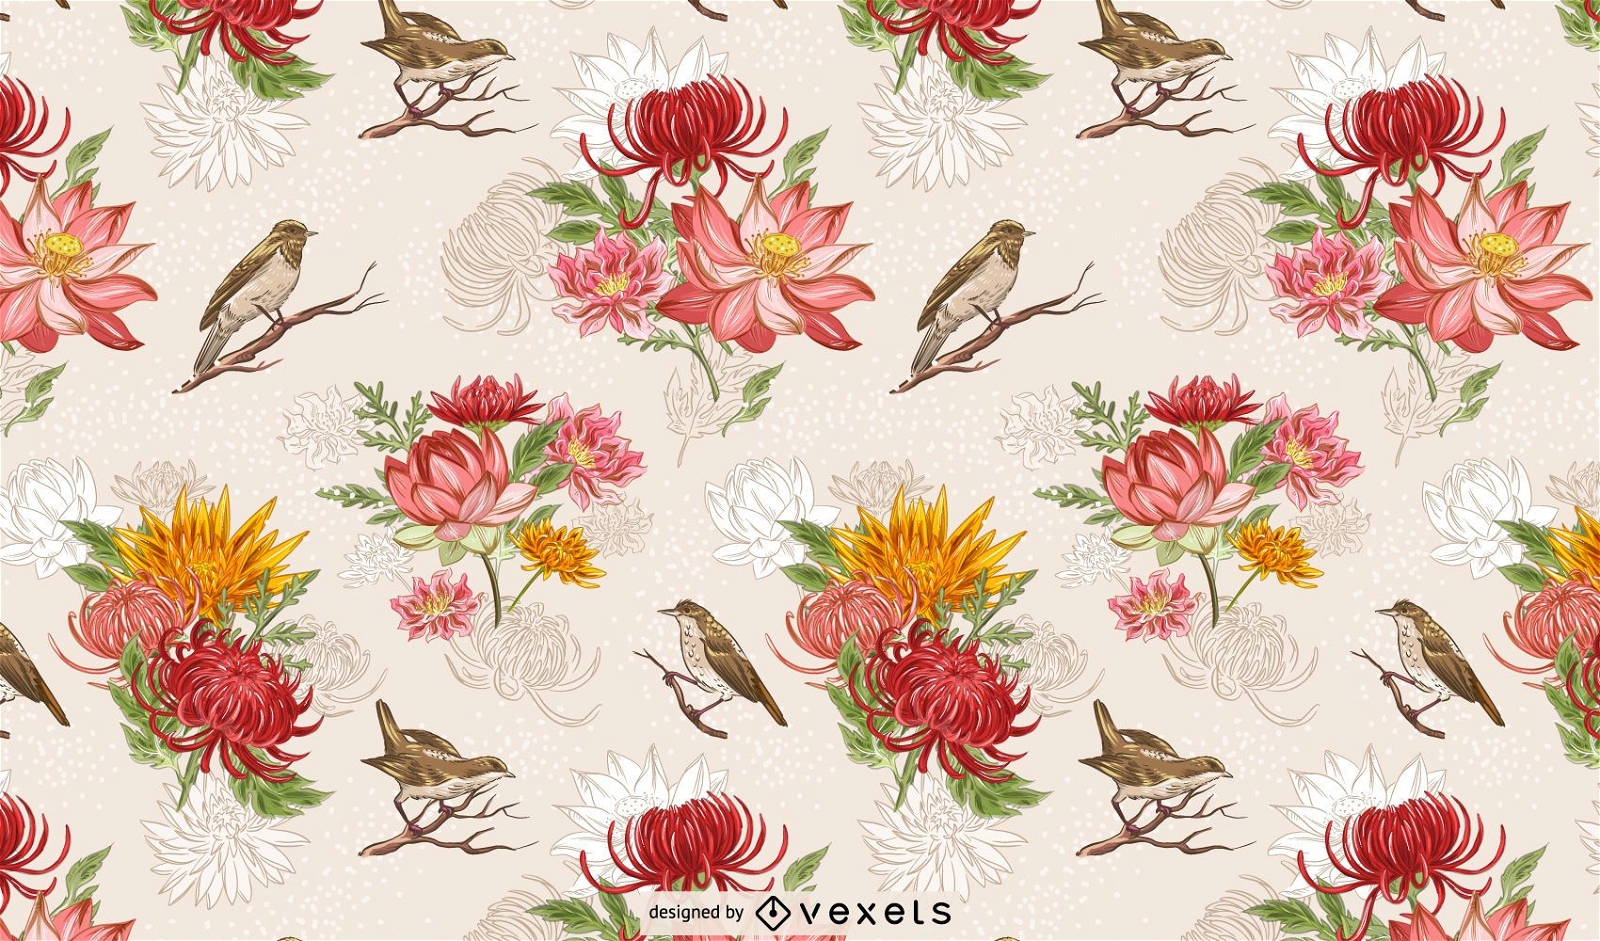 Chinese Birds and Flower Pattern Design